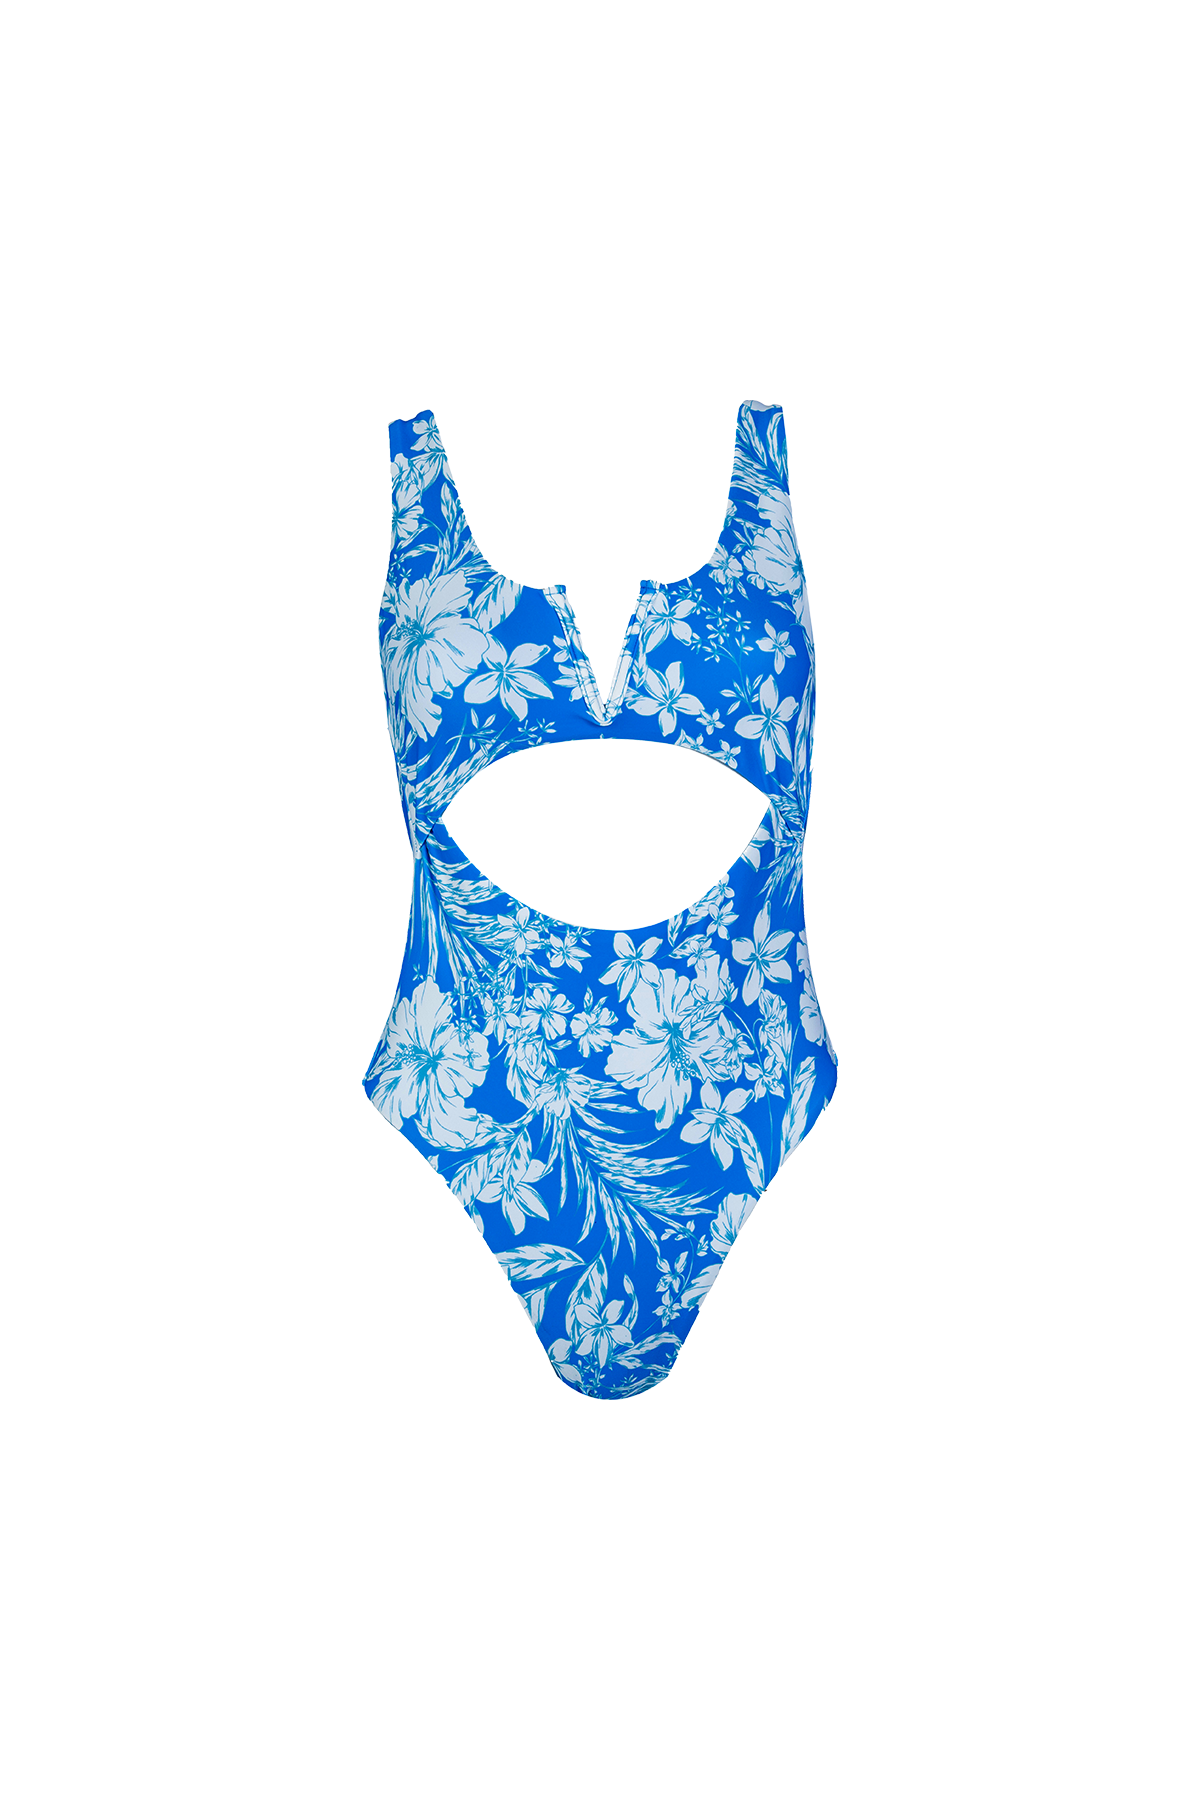 Wave Girl V Front One Piece